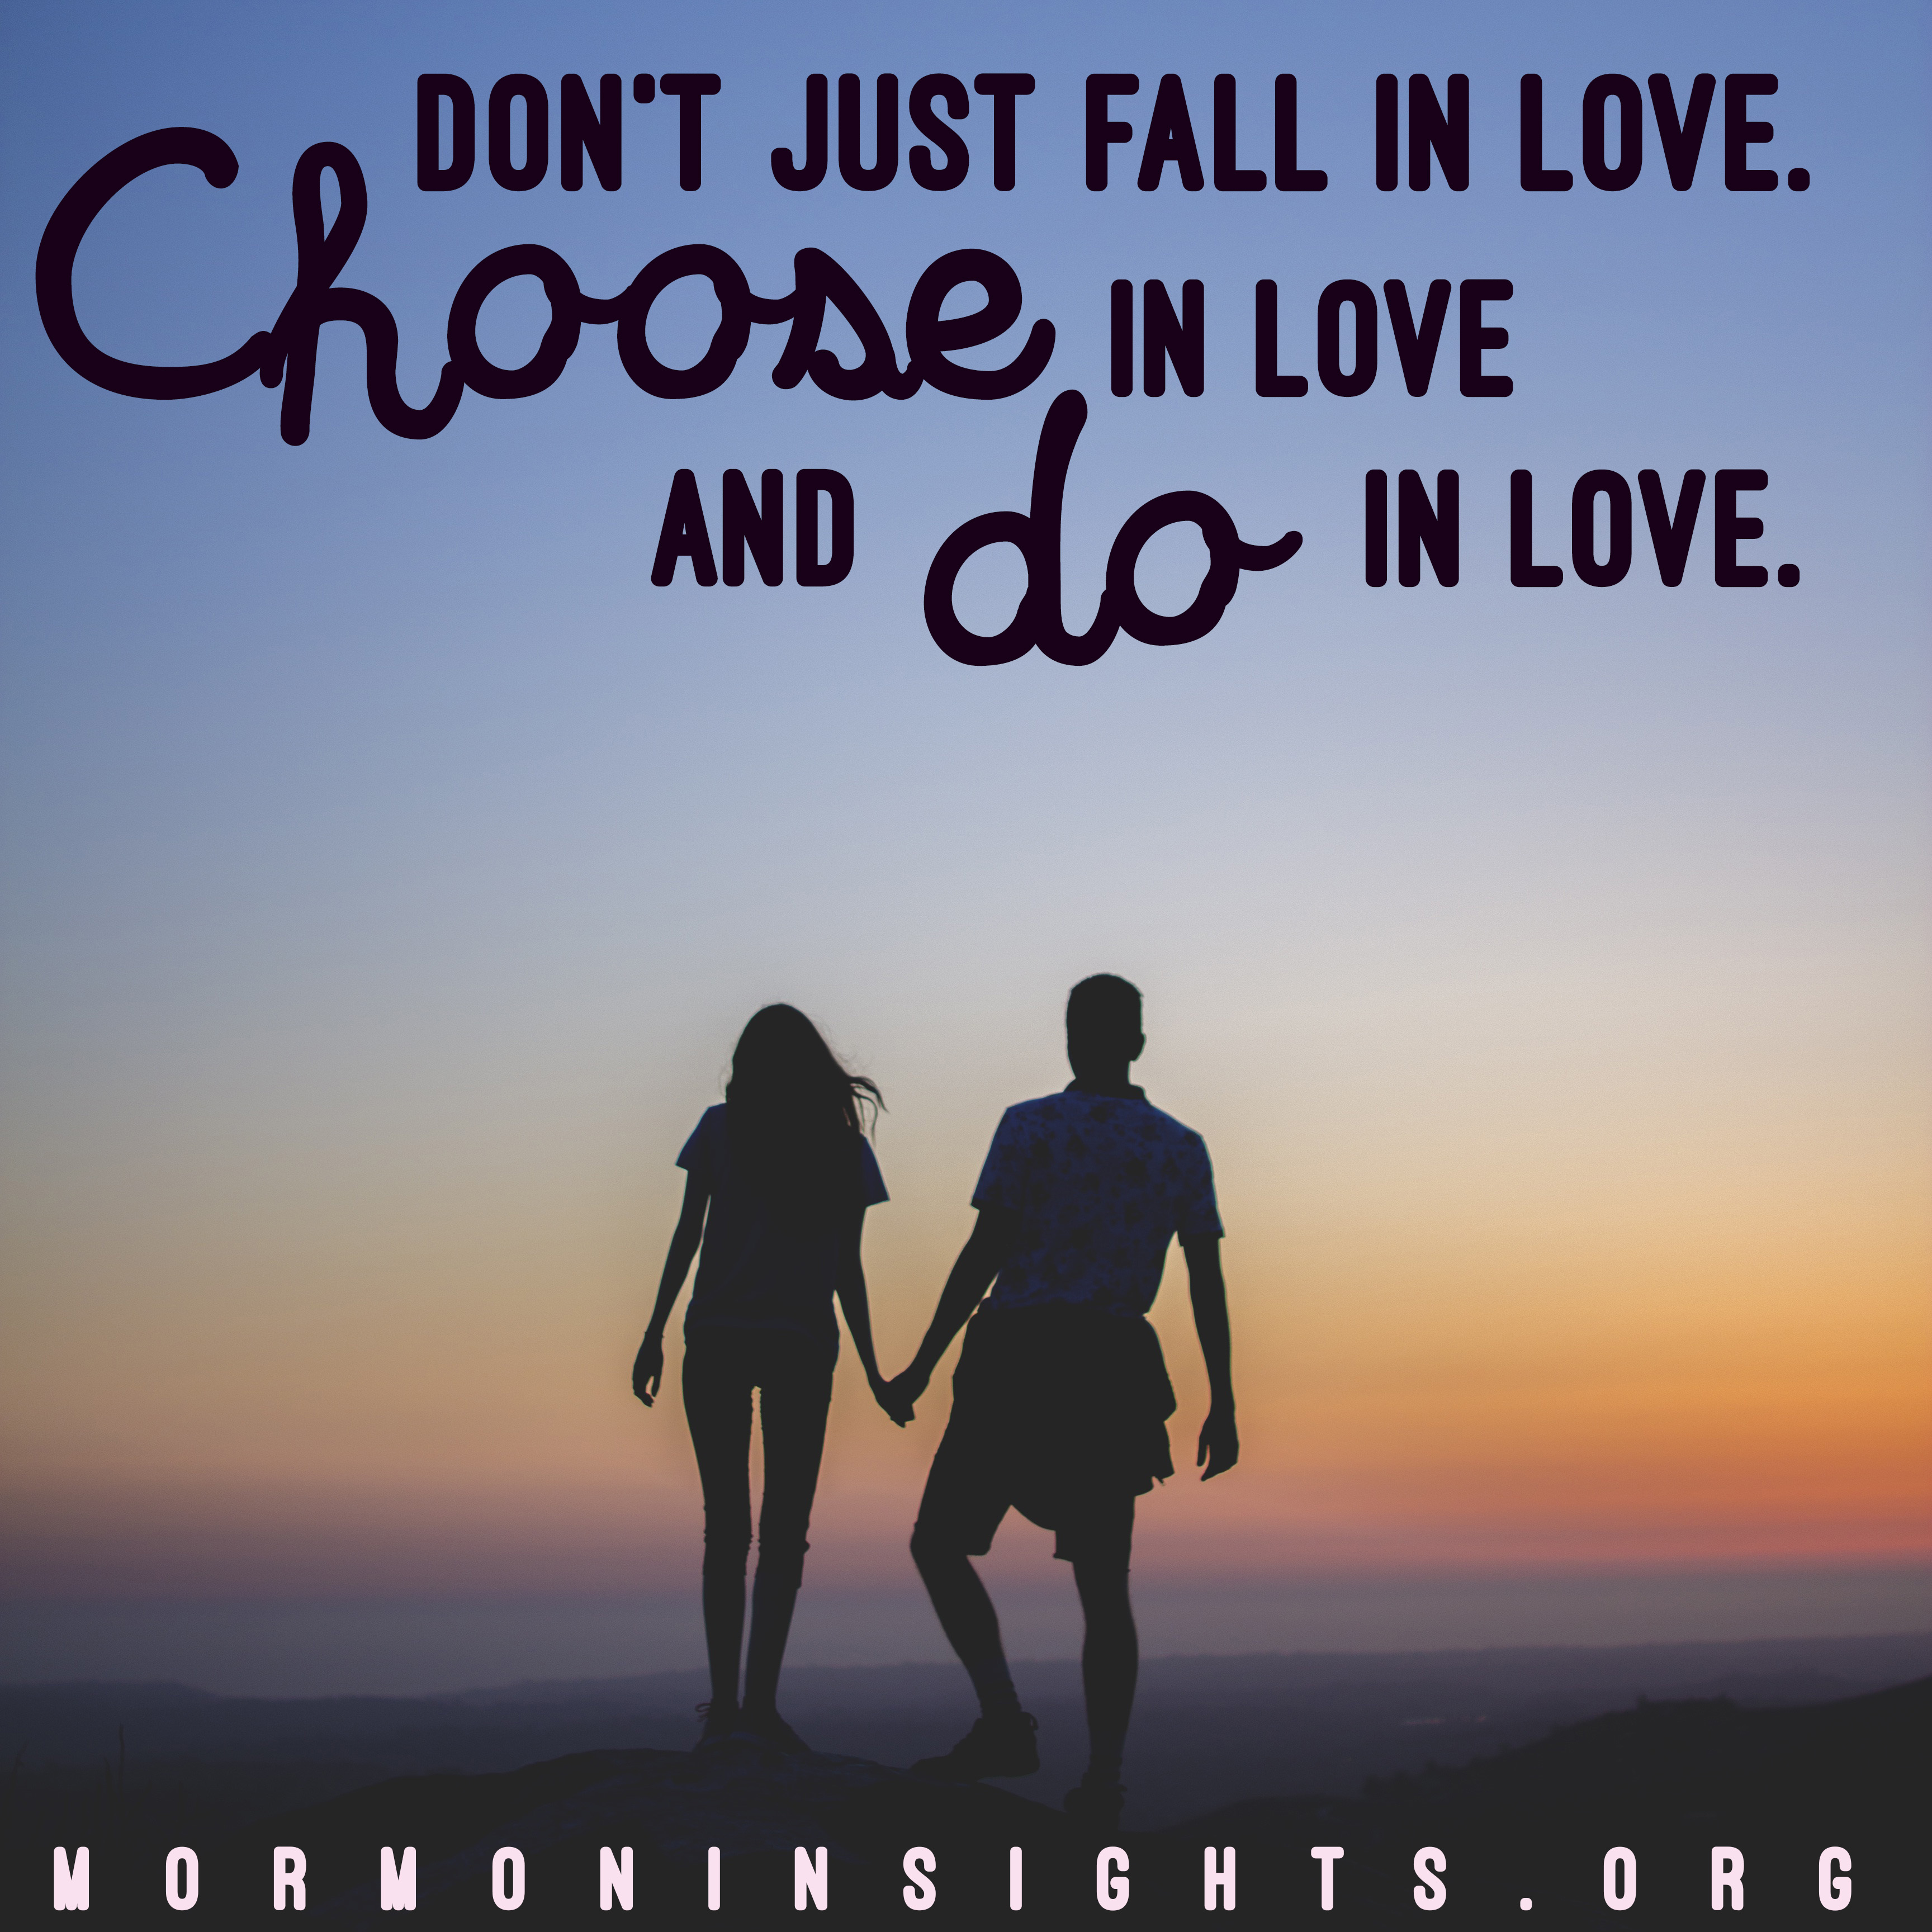 Don't just fall in love. Choose in love and do in love.